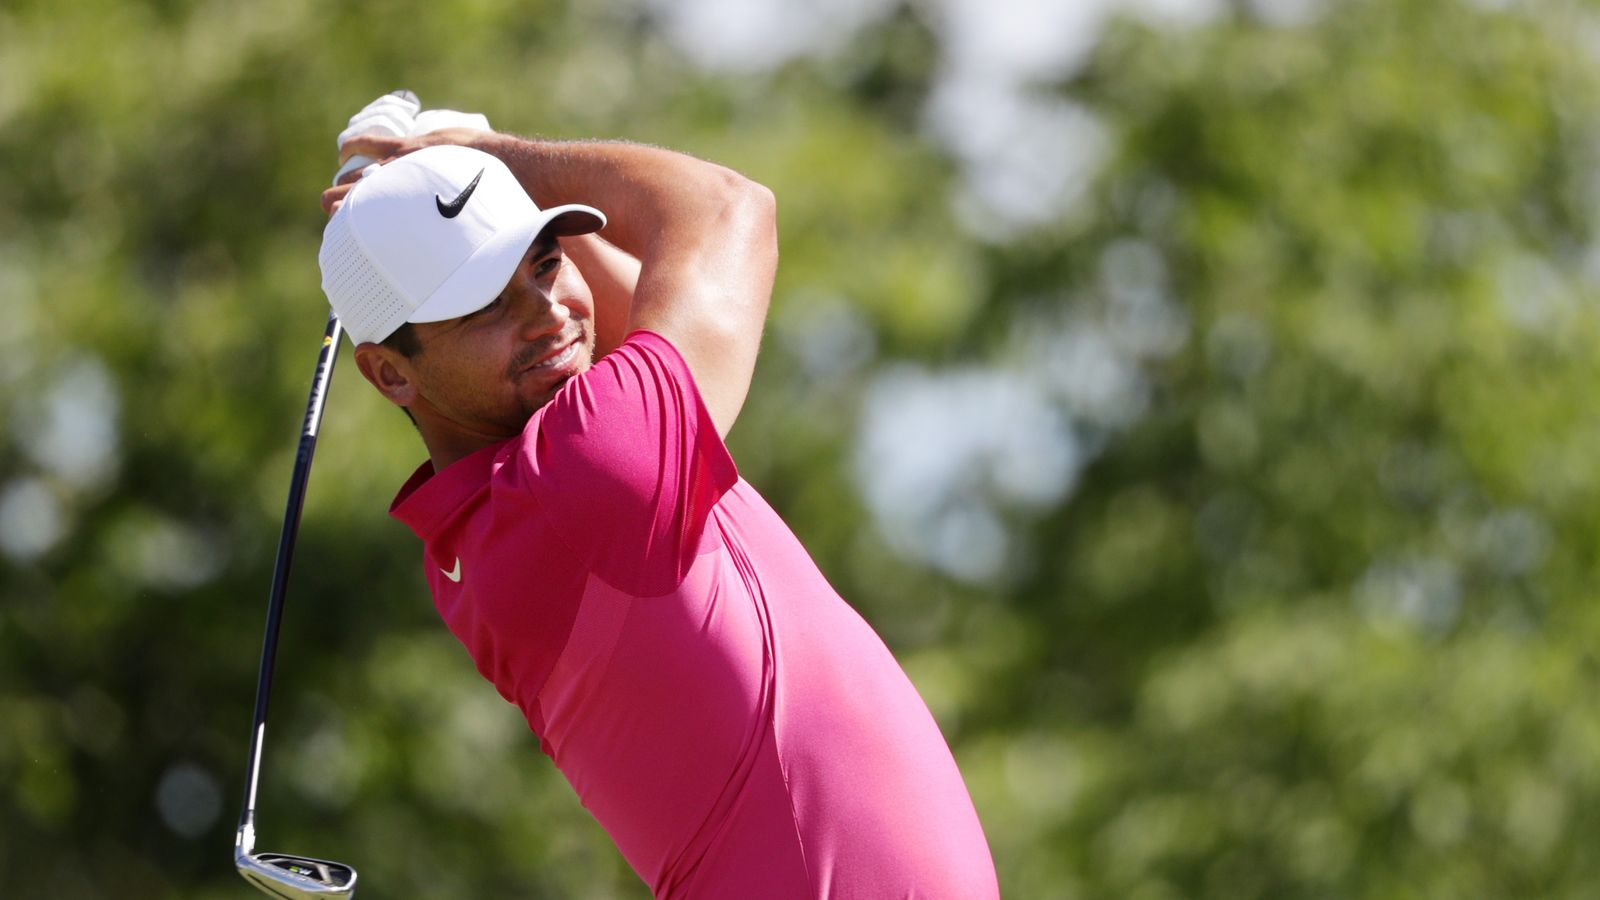 Jason Day insists he can recover from poor start at US Open Golf News